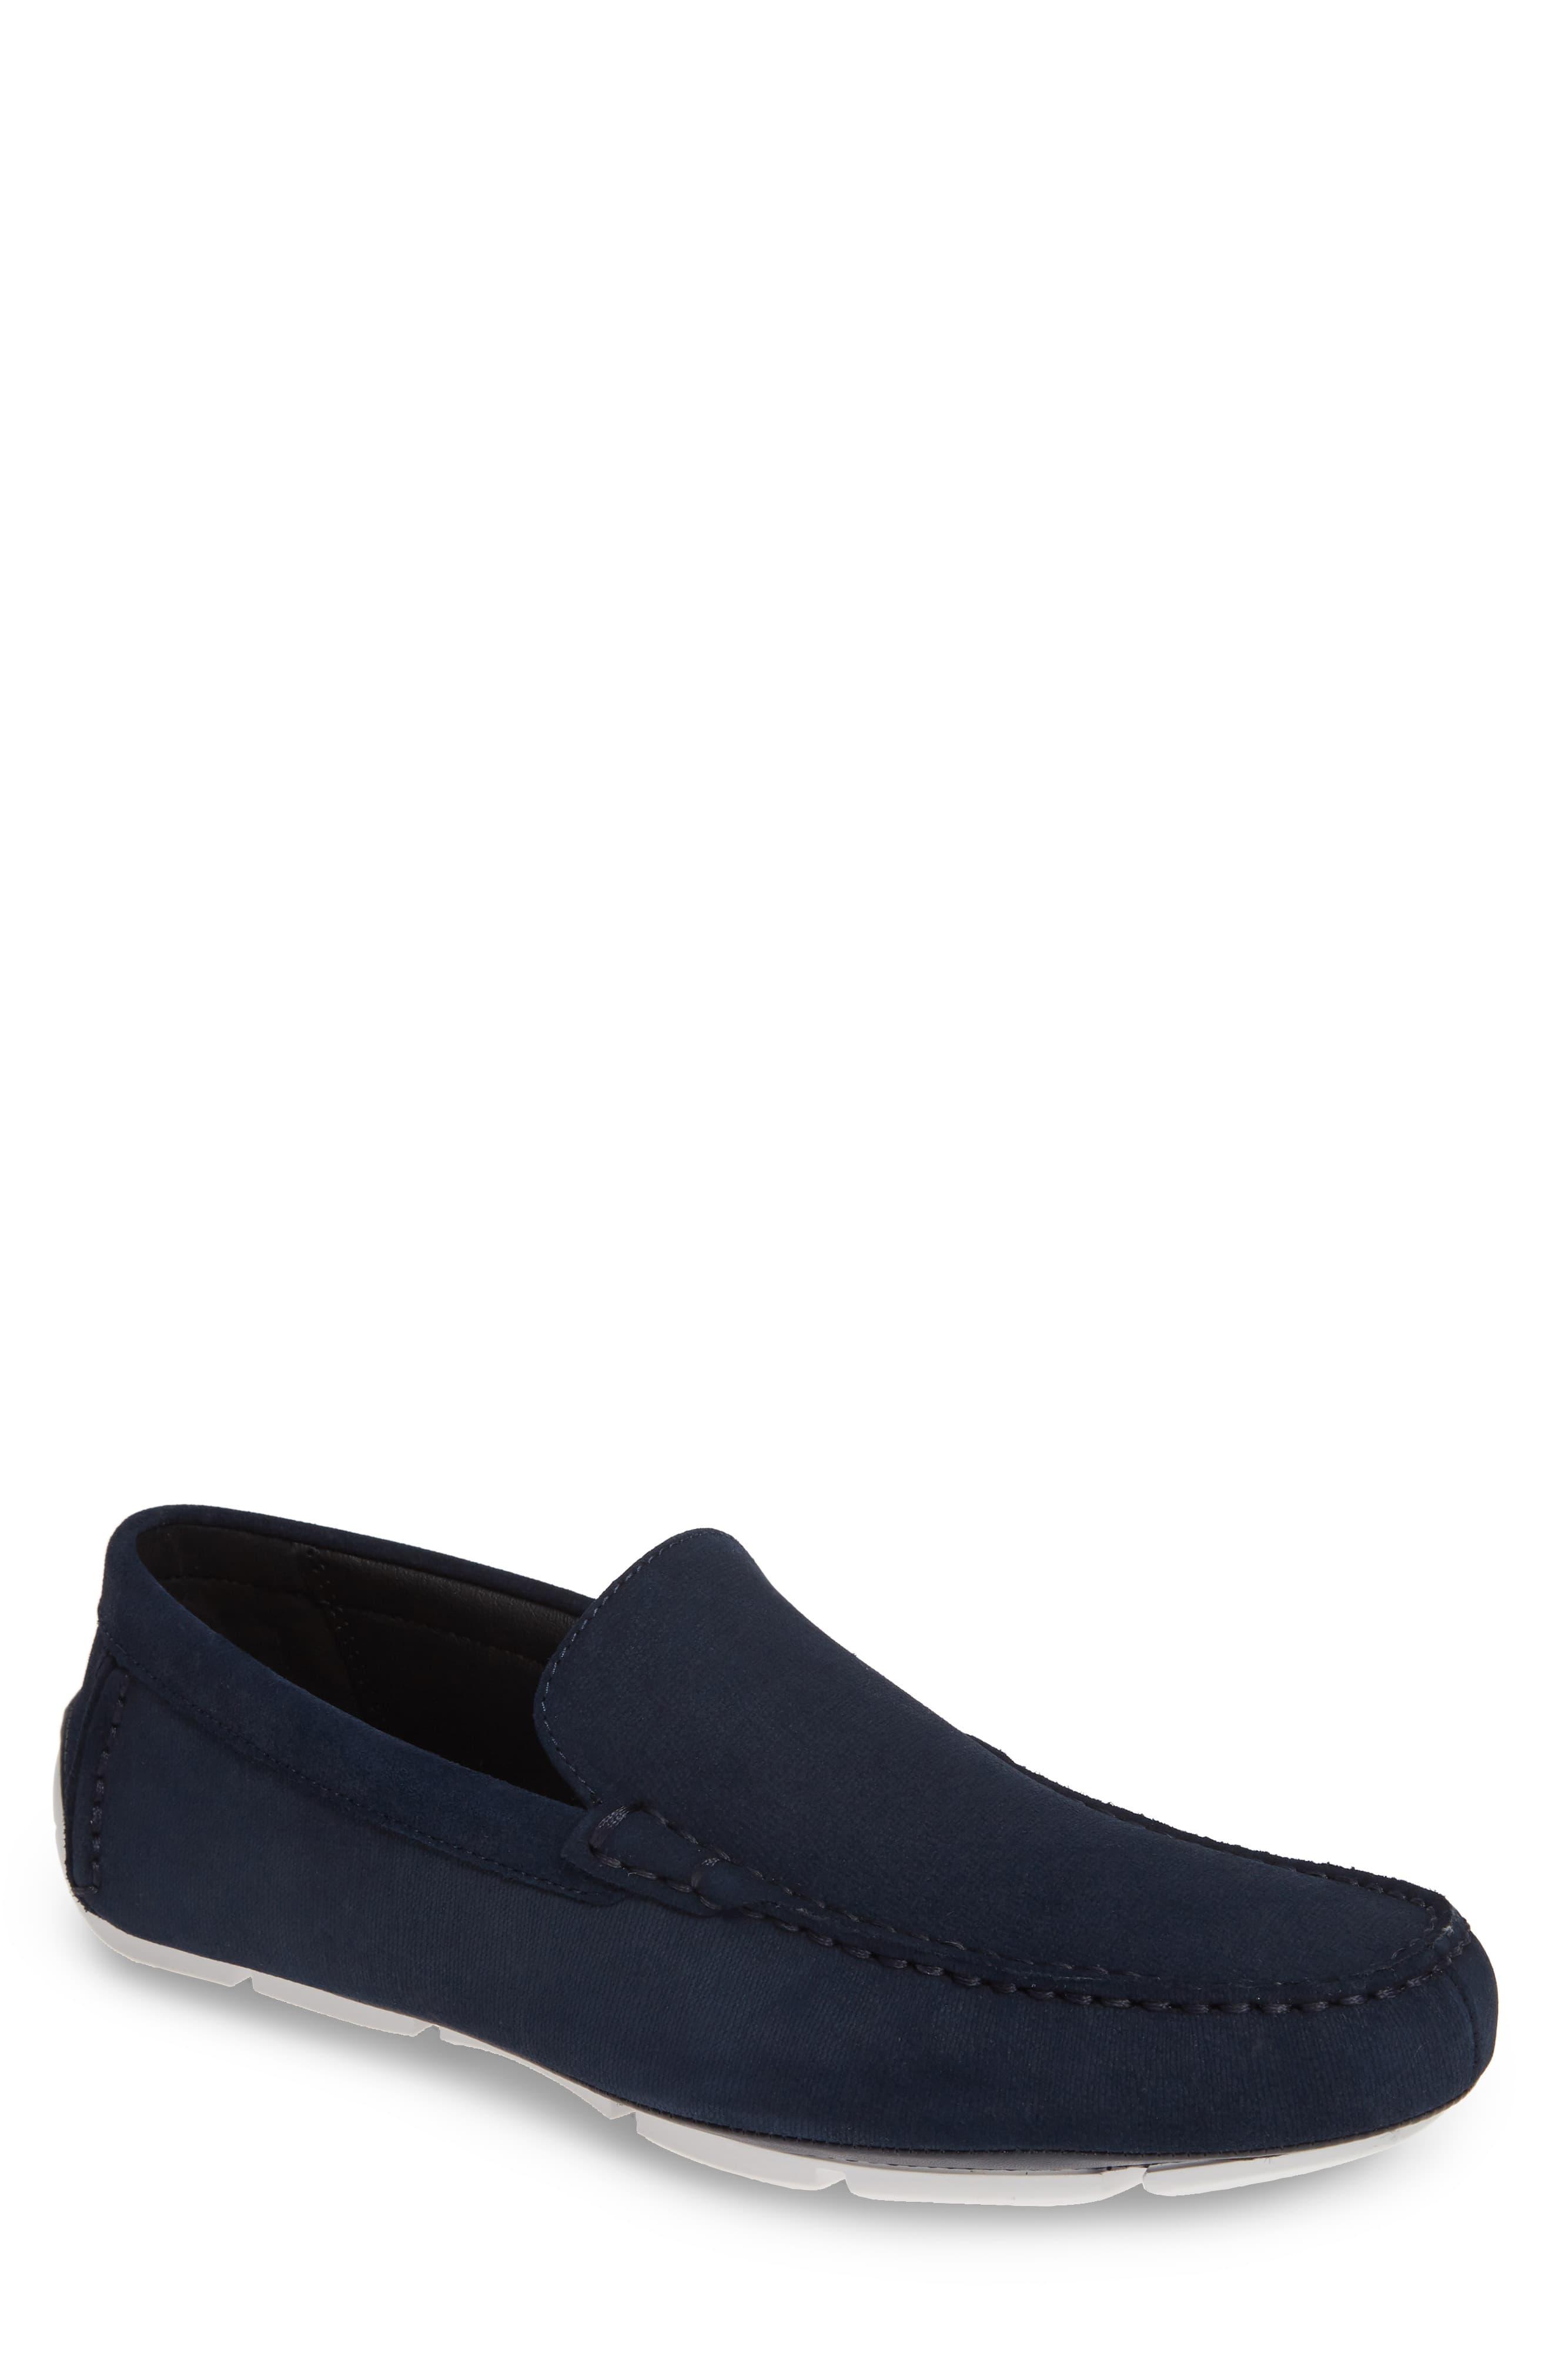 Calvin Klein Leather Kaleb Driving Loafer in Dark Navy Suede (Blue) for ...